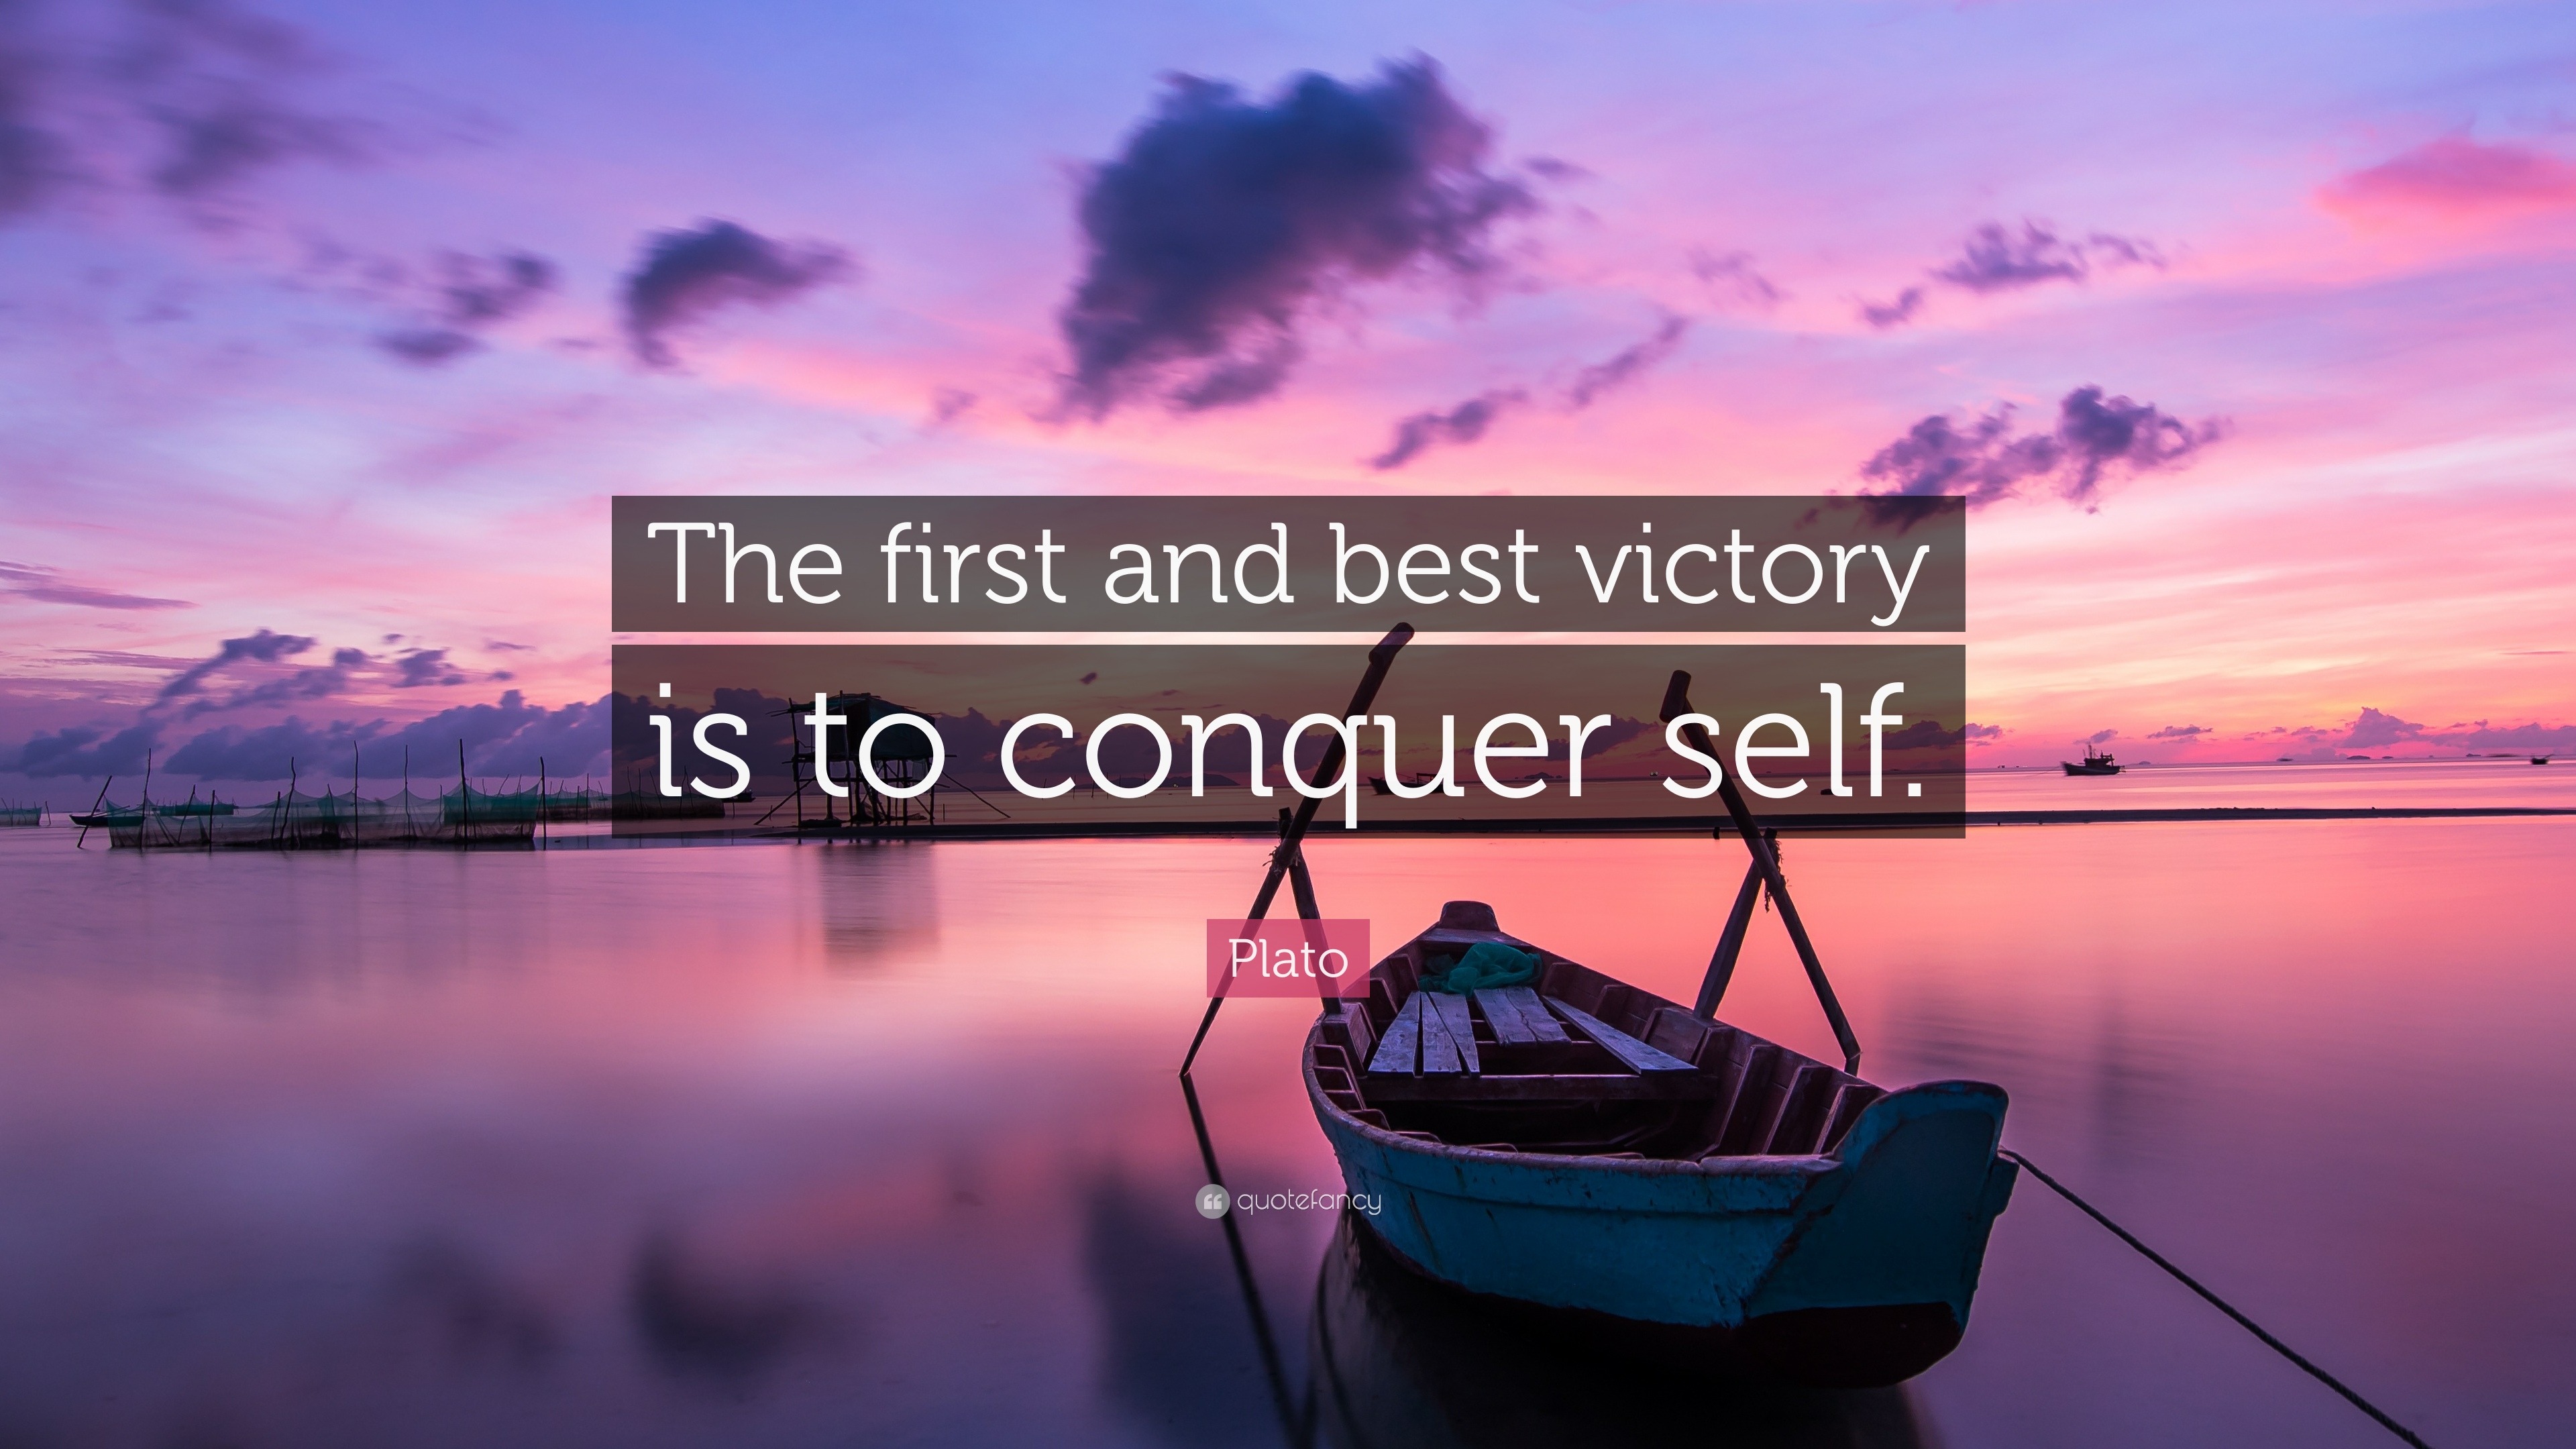 Plato Quote: “The first and best victory is to conquer self.” (12